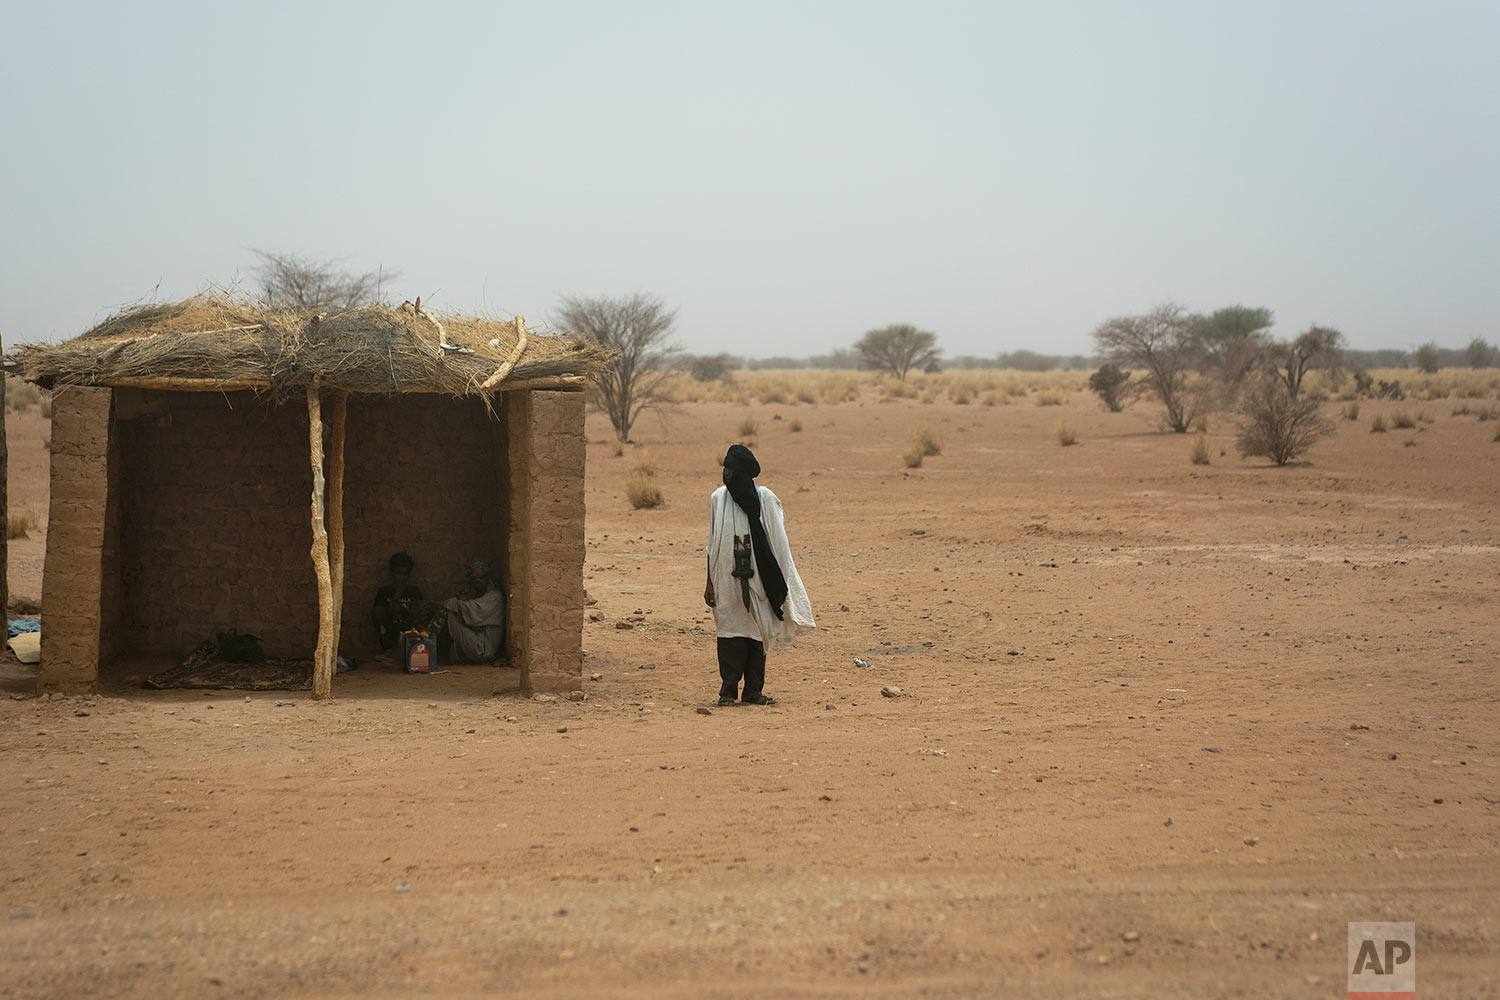  A lone man stands by his hut in Niger's Tenere desert region of the south central Sahara on May 30, 2018. (AP Photo/Jerome Delay) 